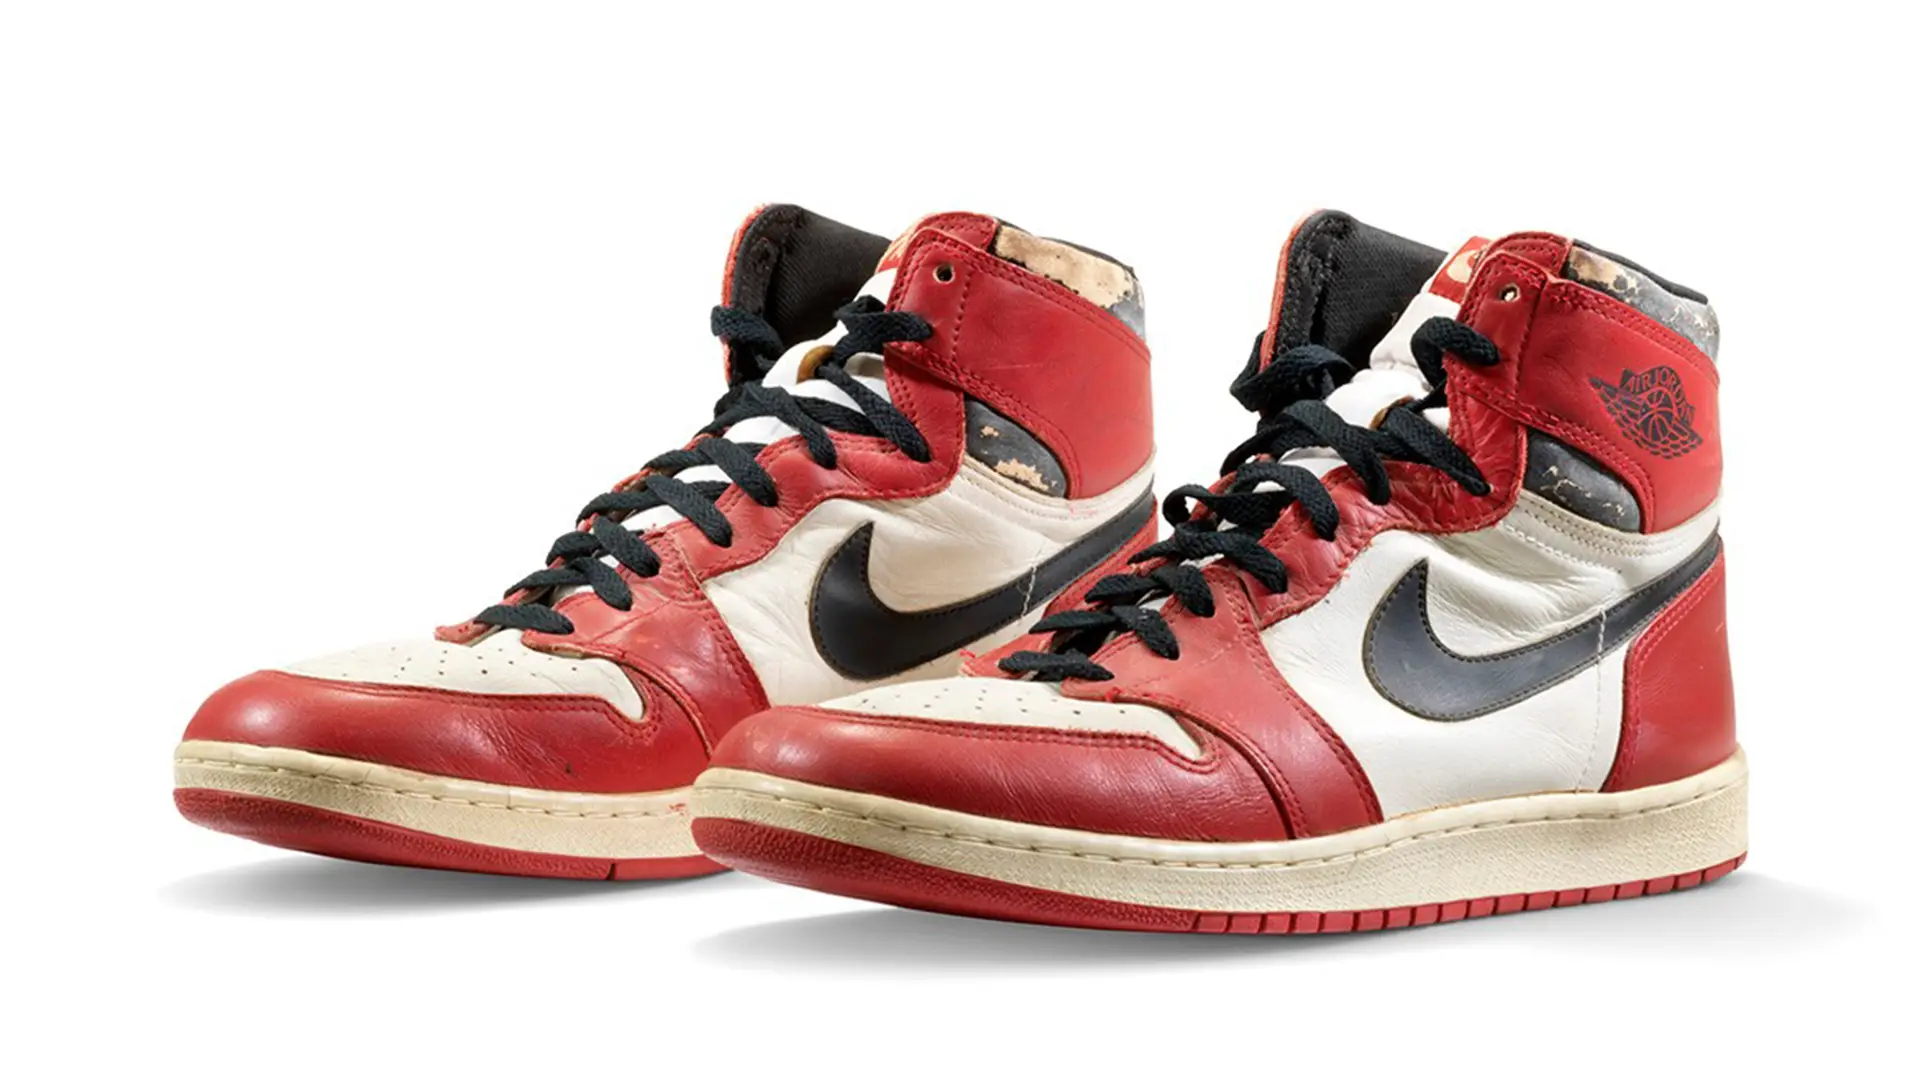 The 12 Most Expensive Jordans Ever Sold